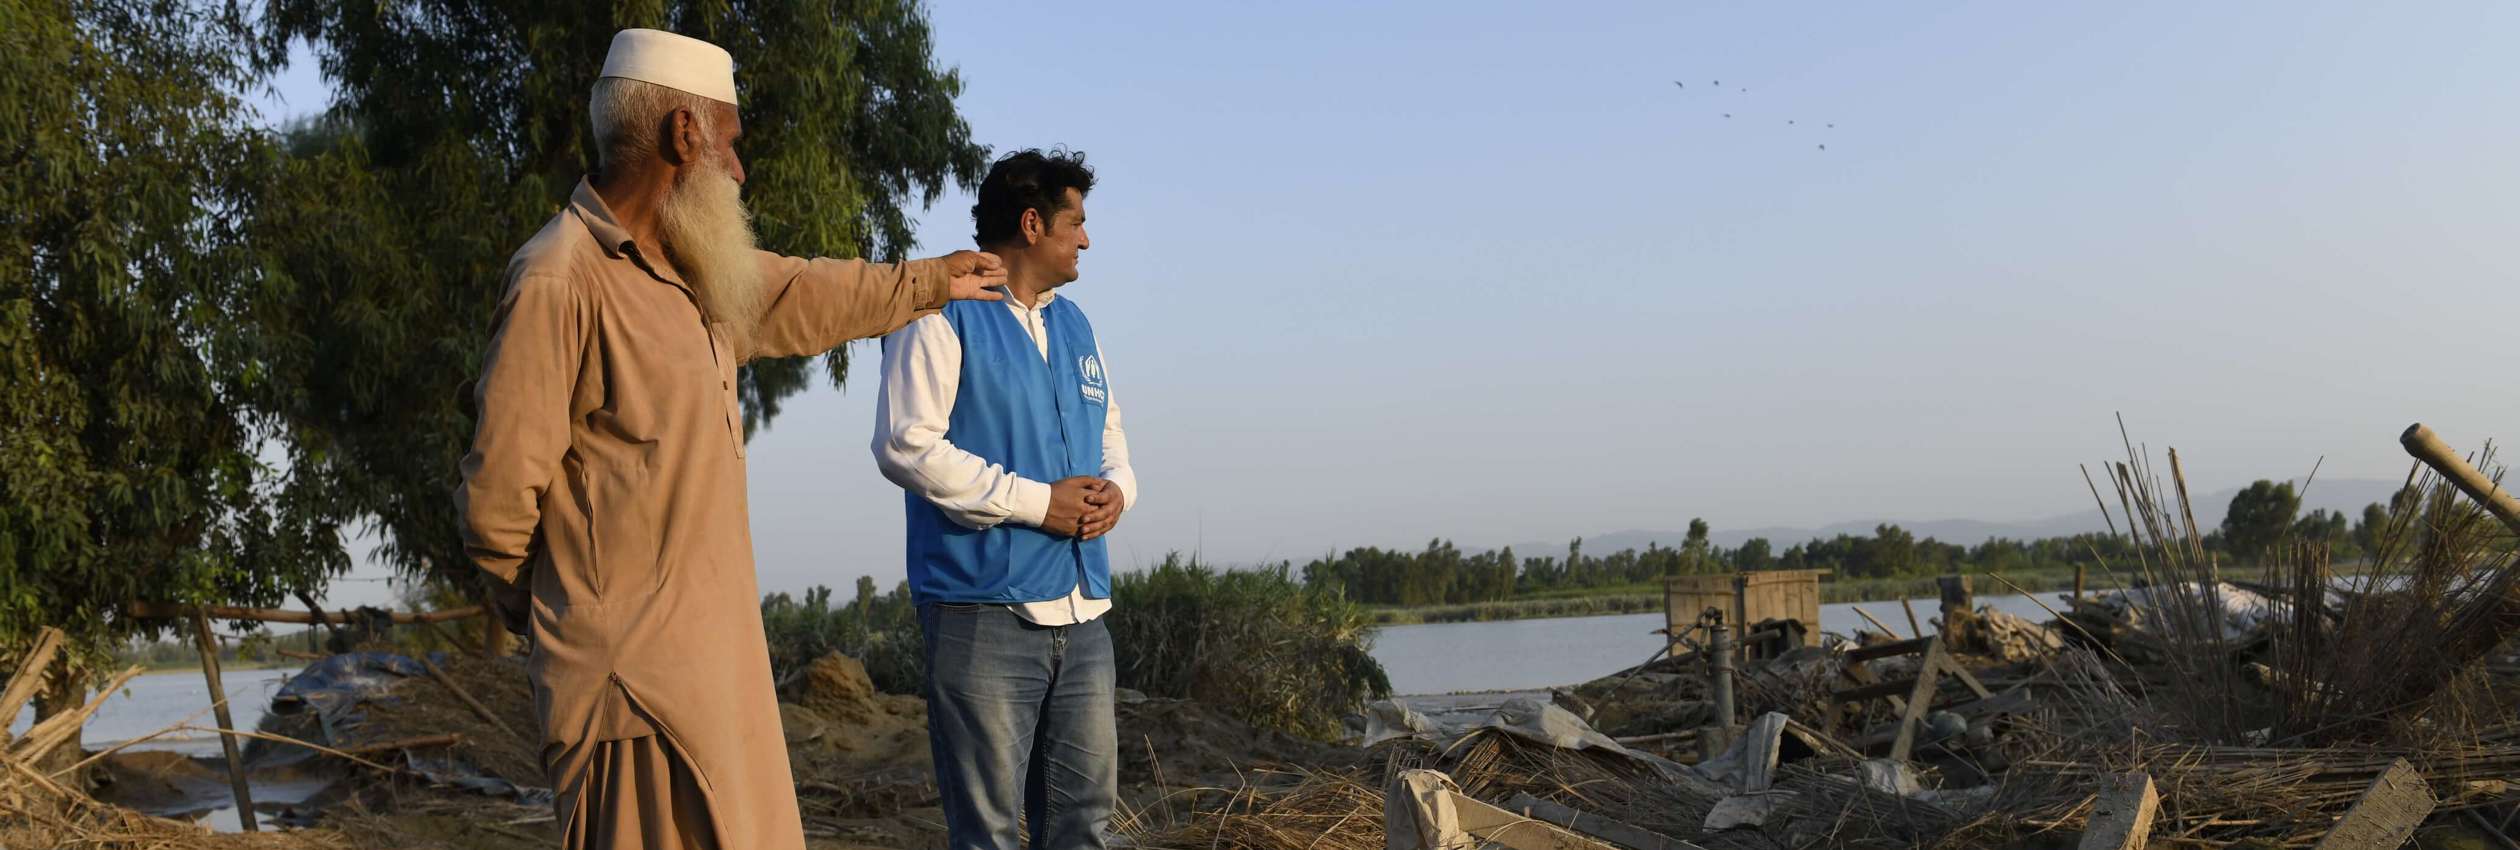 UNHCR workers and flood survivor survey damage in Khyber Pakhtunkhwa province, Pakistan.